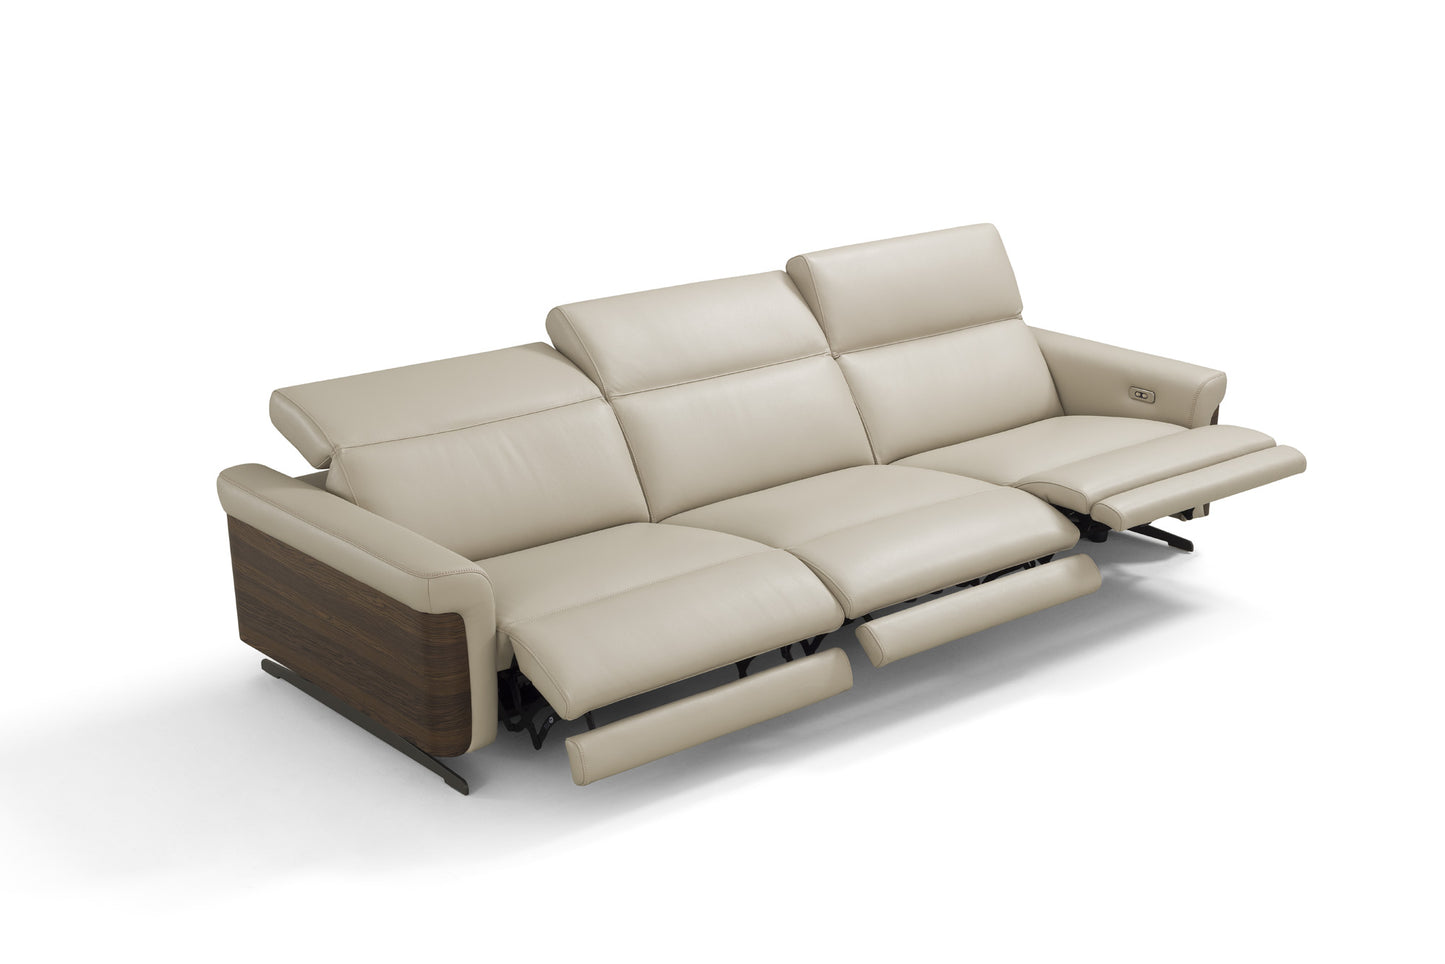 INCANTO - I803 EXTRA LARGE Sofa with Walnut Arm Accents with/3 power Recliners